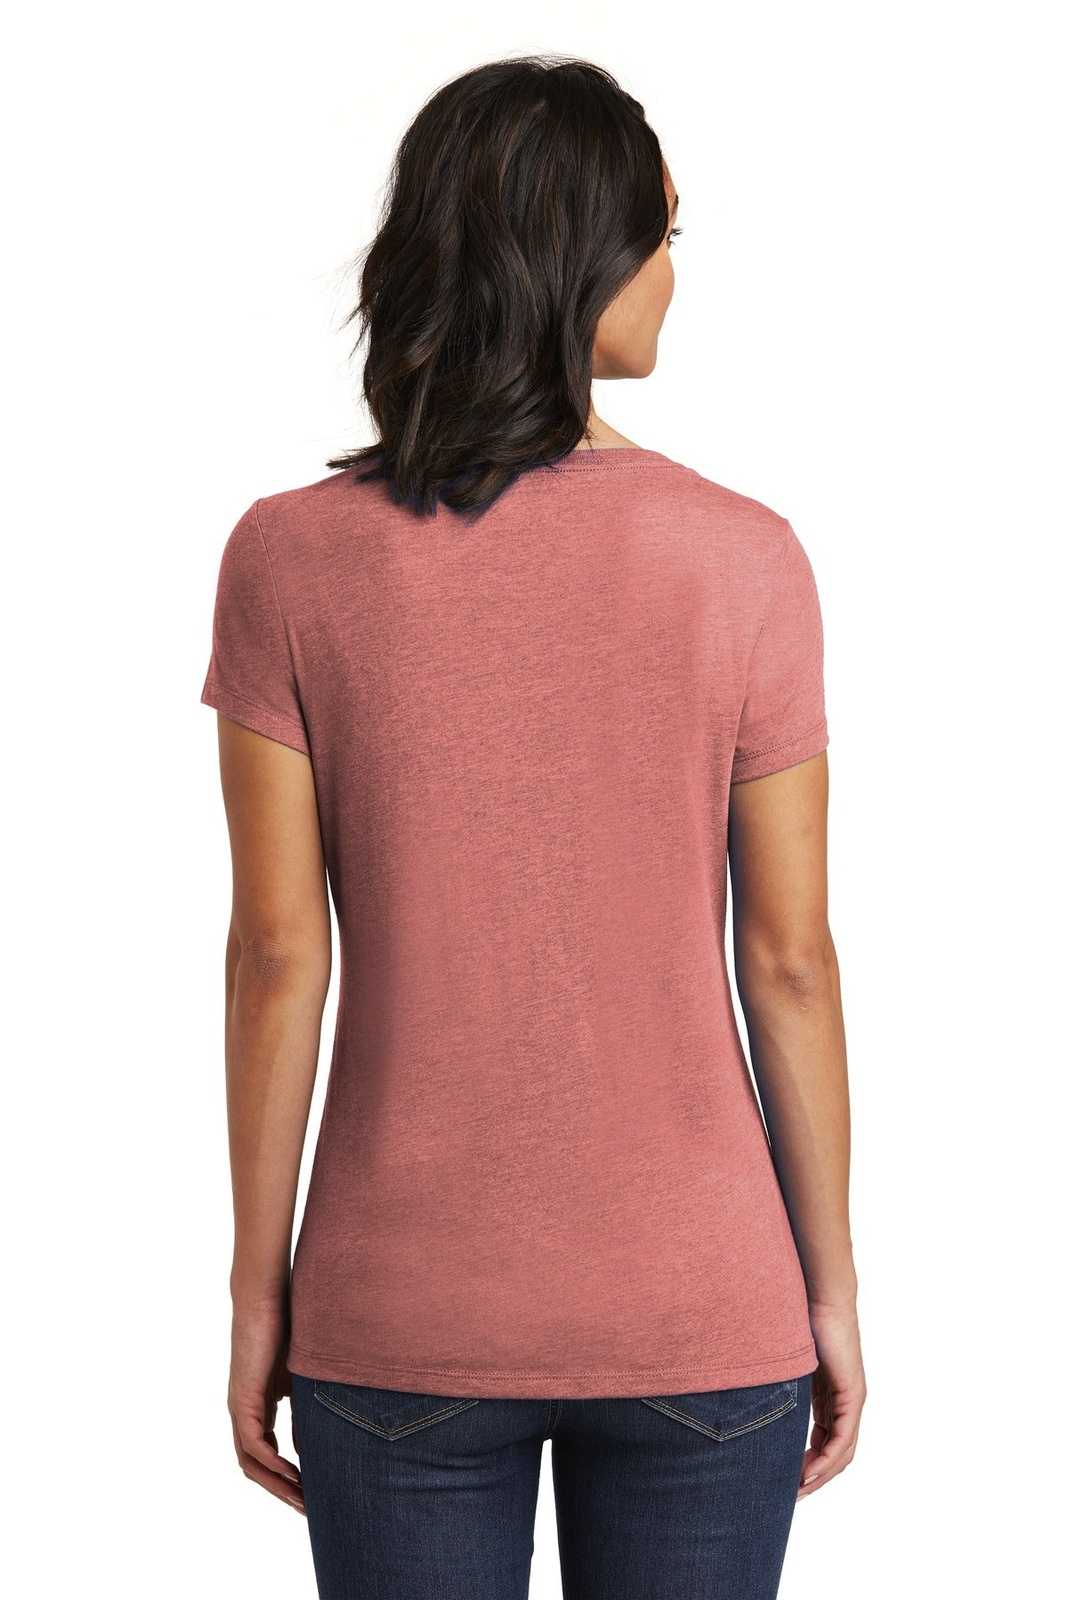 District DT6503 Women's Very Important Tee V-Neck - Blush Frost - HIT a Double - 1